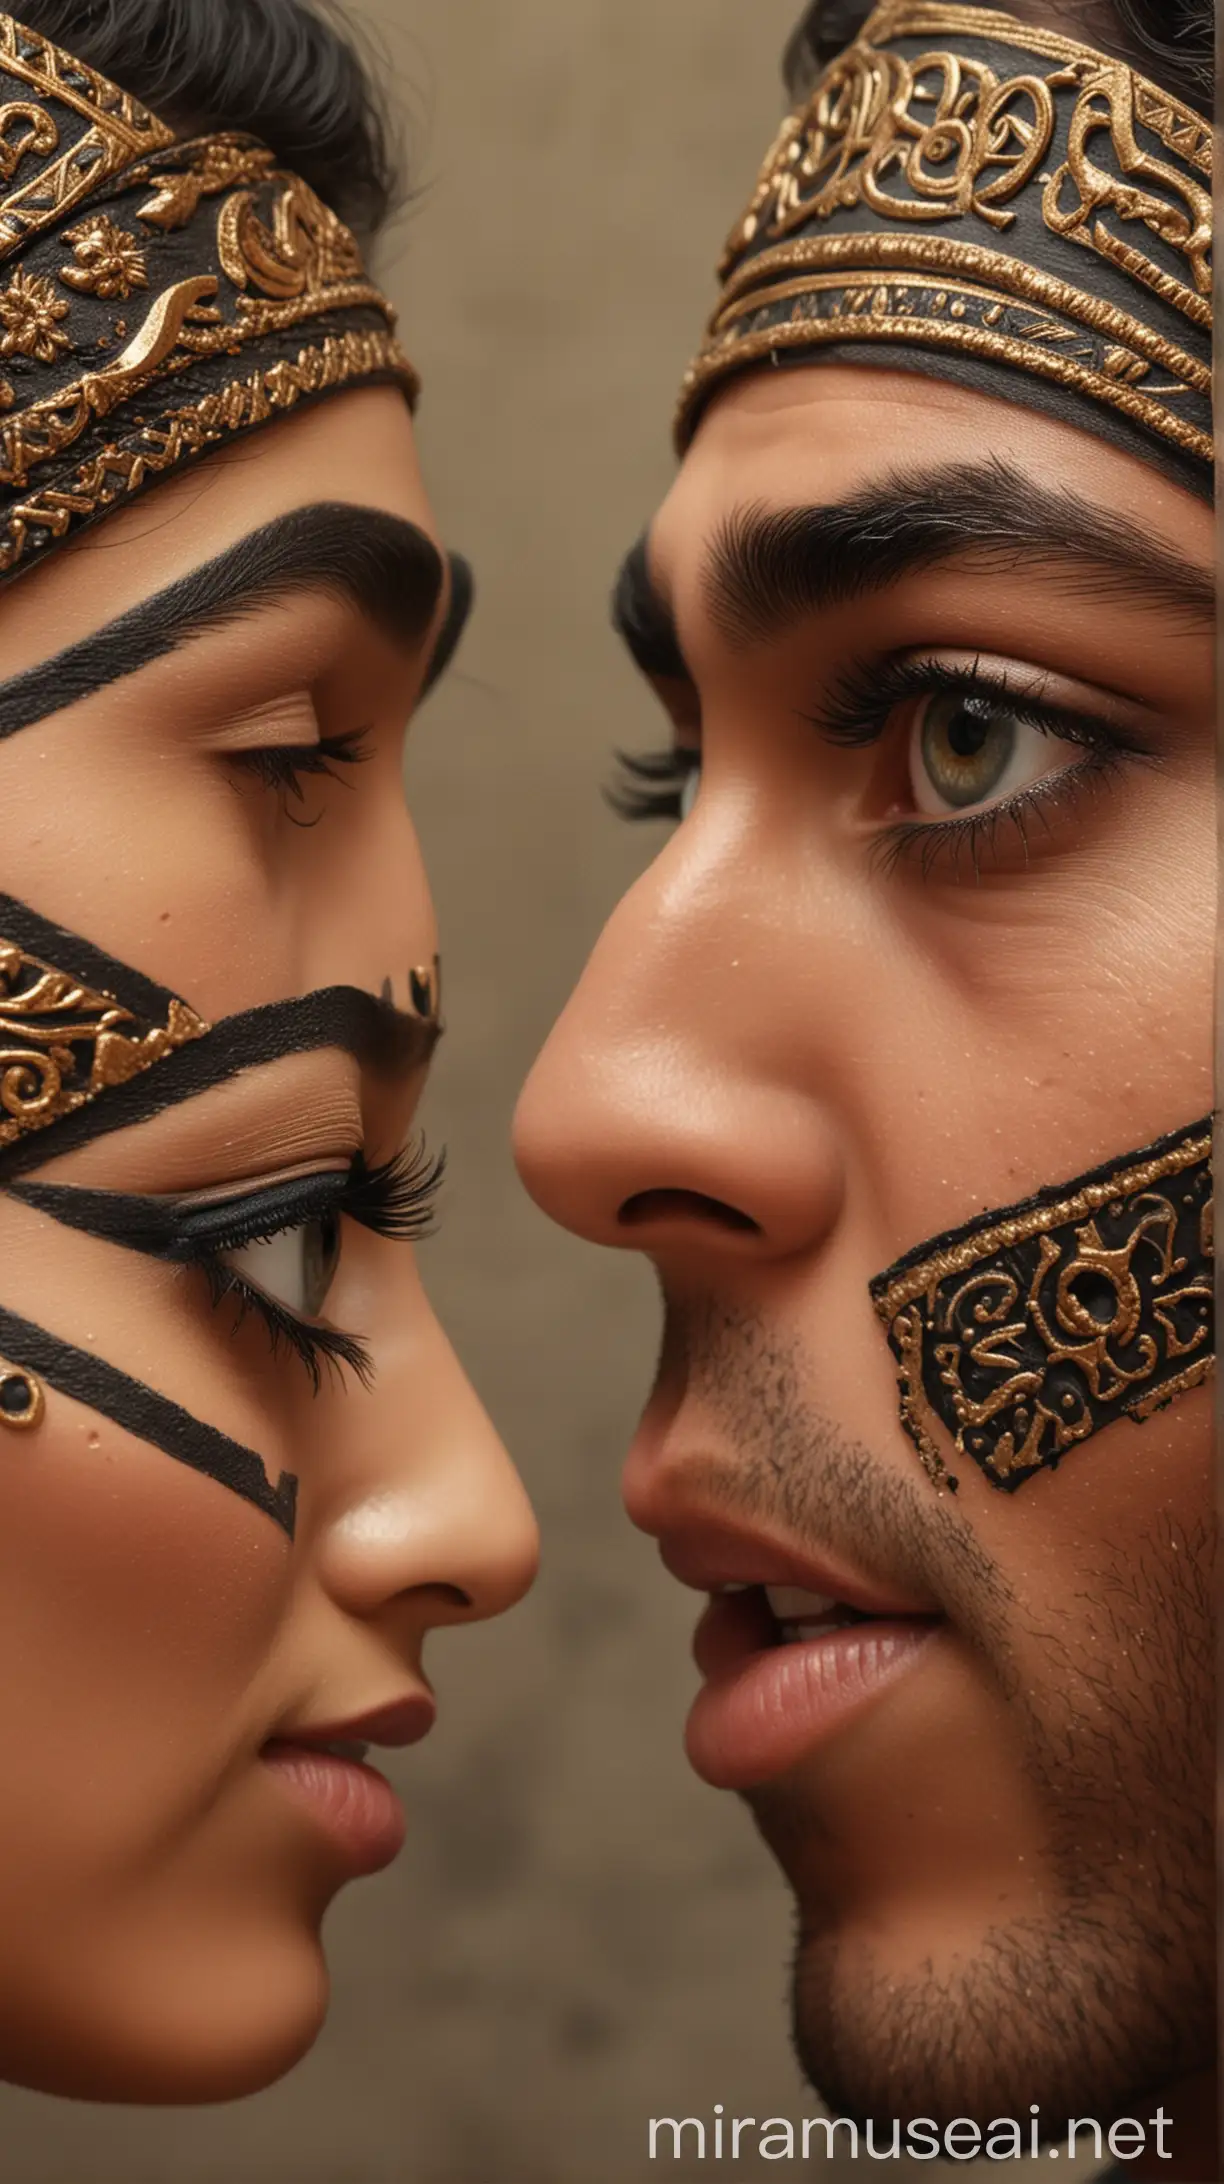 An image of an Egyptian man and woman applying kohl around their eyes, with intricate designs extending from the corners of their eyes to the sides of their faces. hyper realistic